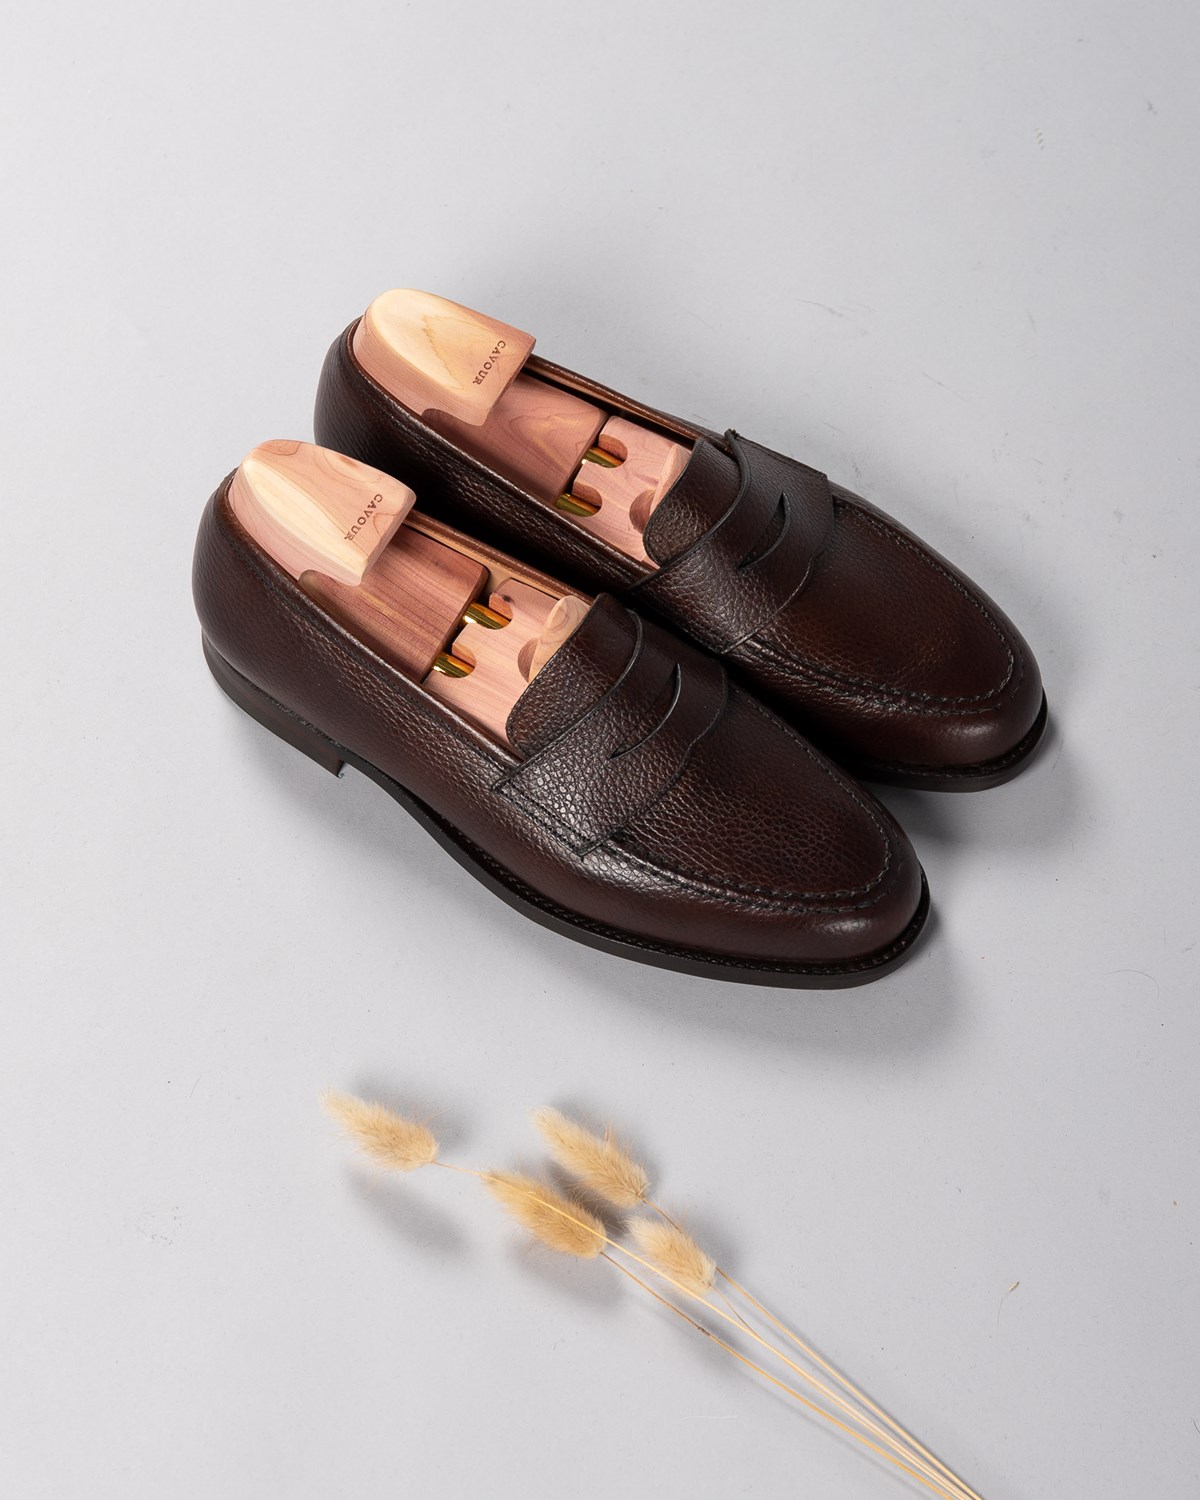 The Boston Loafer in Tan - The Ben Silver Collection